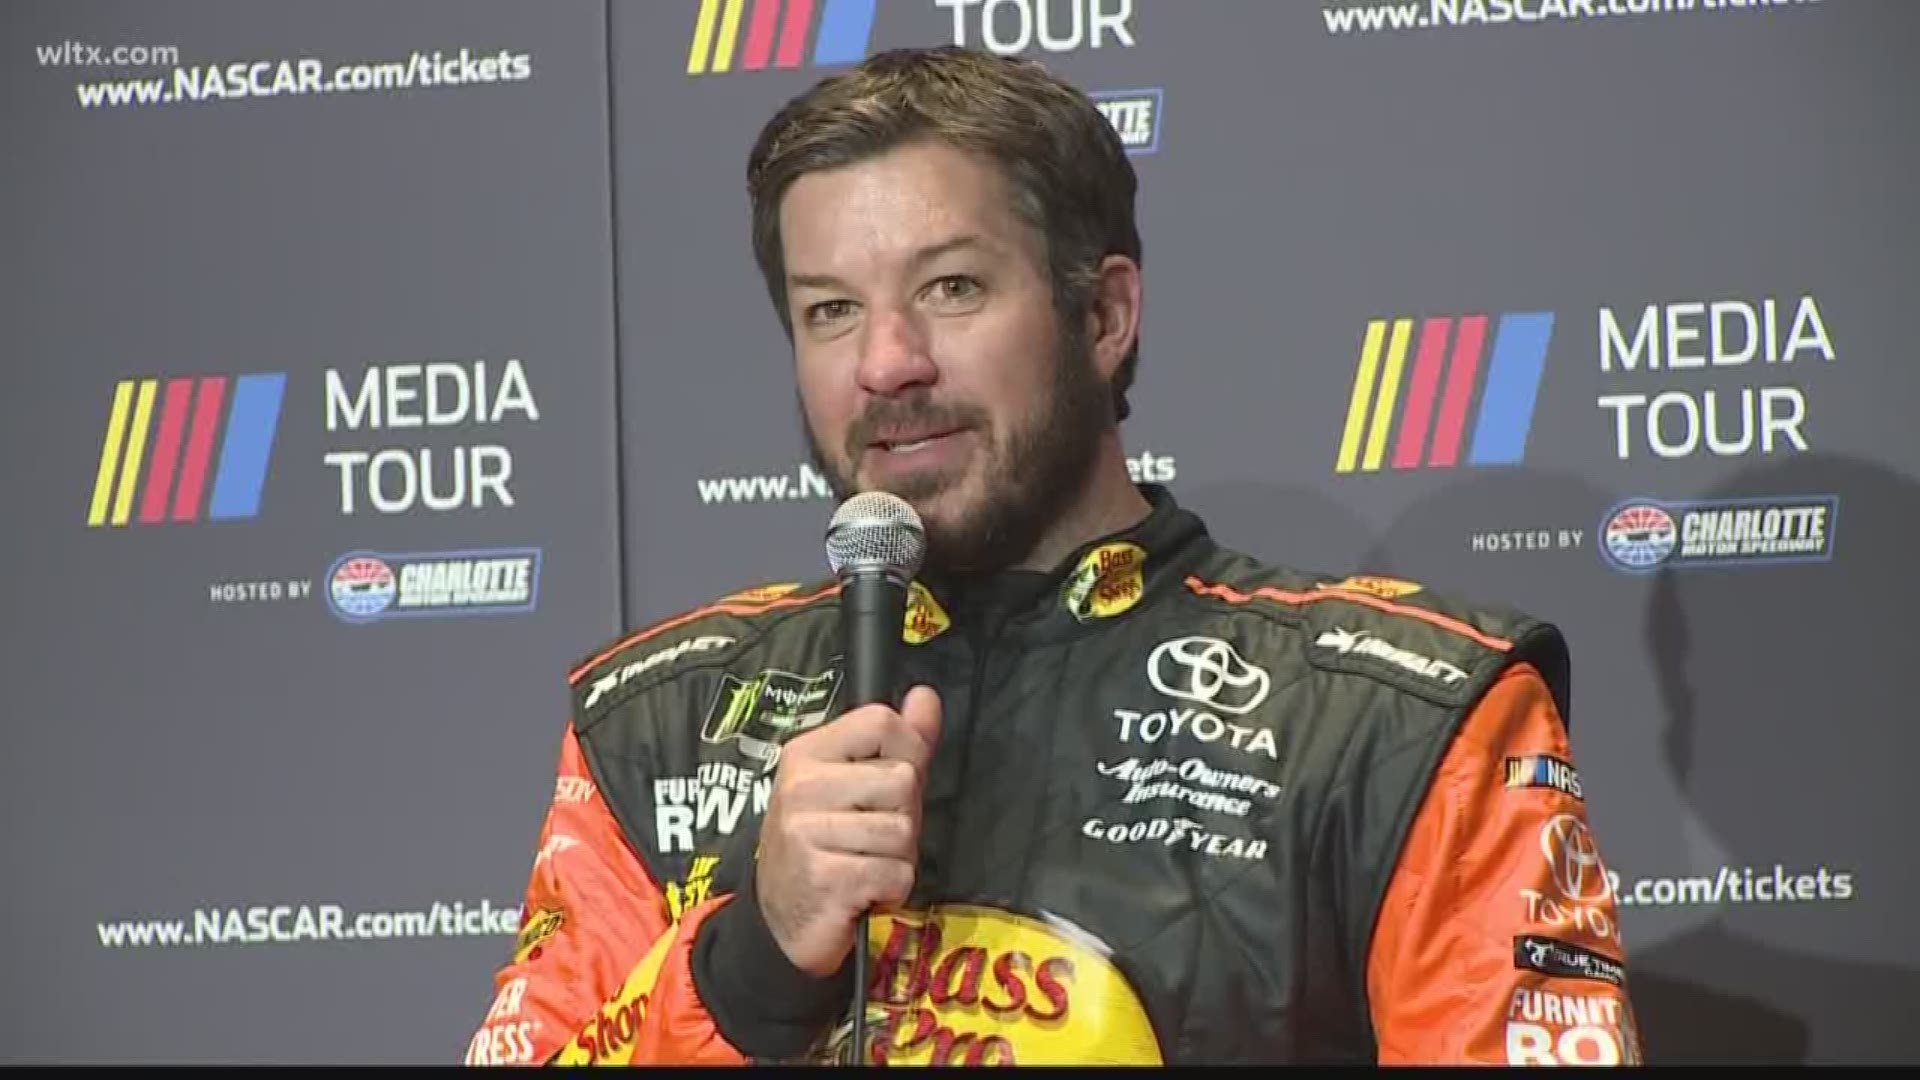 Reigning Cup champion Martin Truex, Junior will be attending the Super Bowl to cheer on his Eagles.